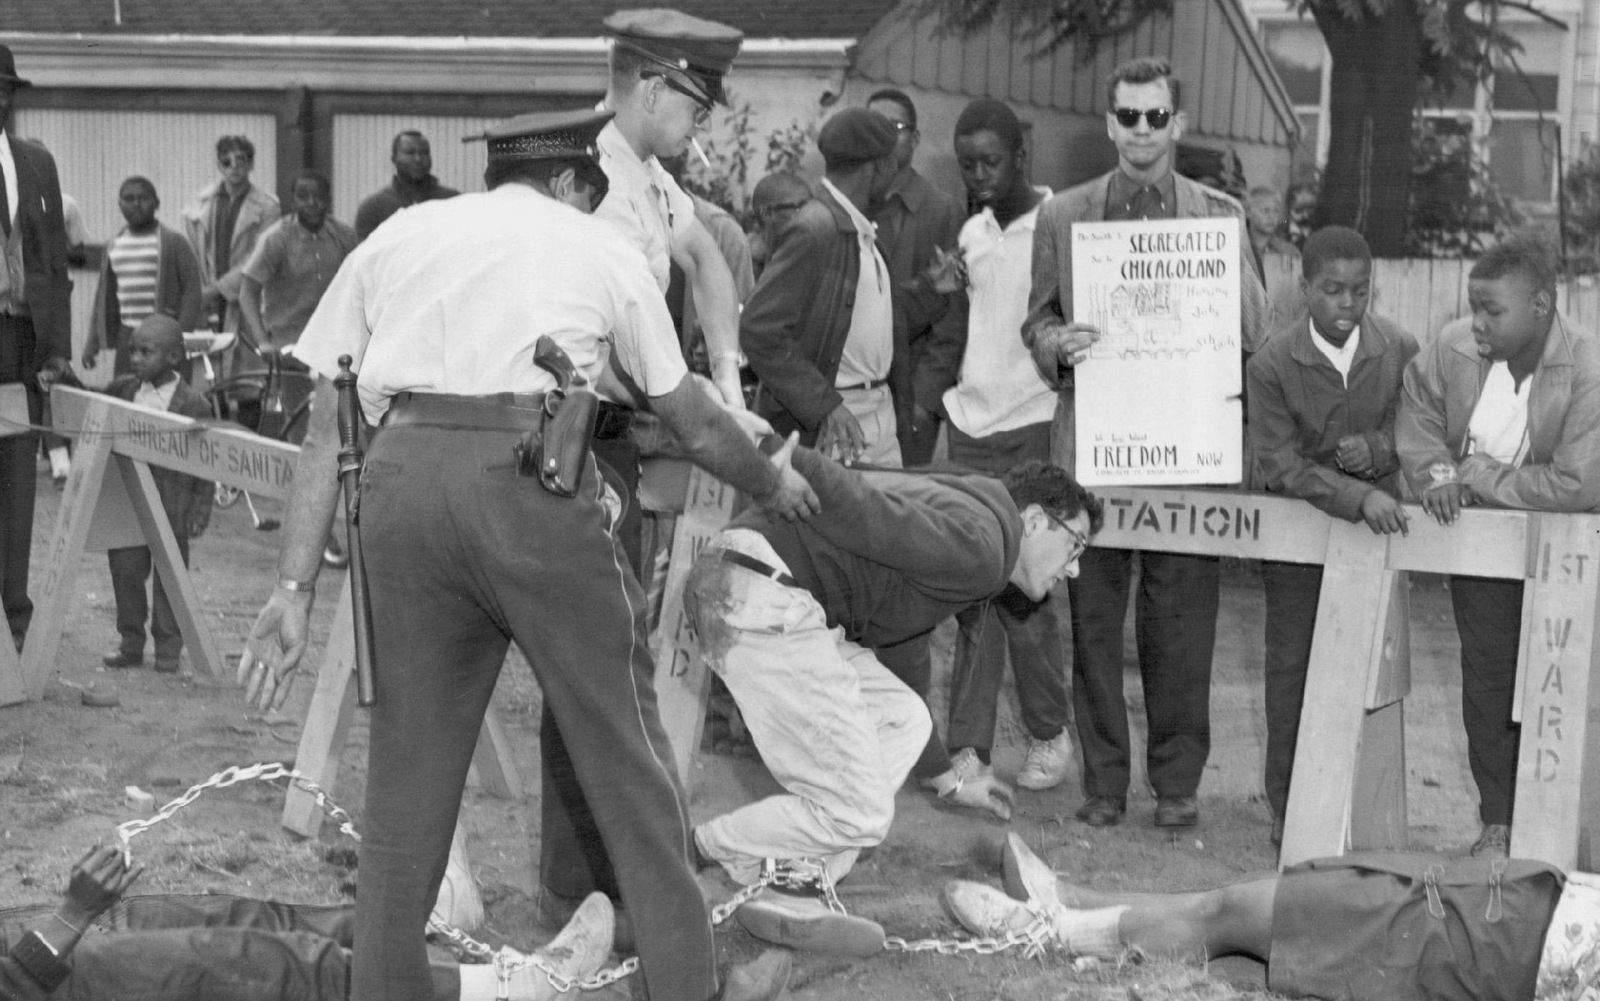 Chicago Police arrest Bernie Sanders during a civil rights protest on August 13, 1963.